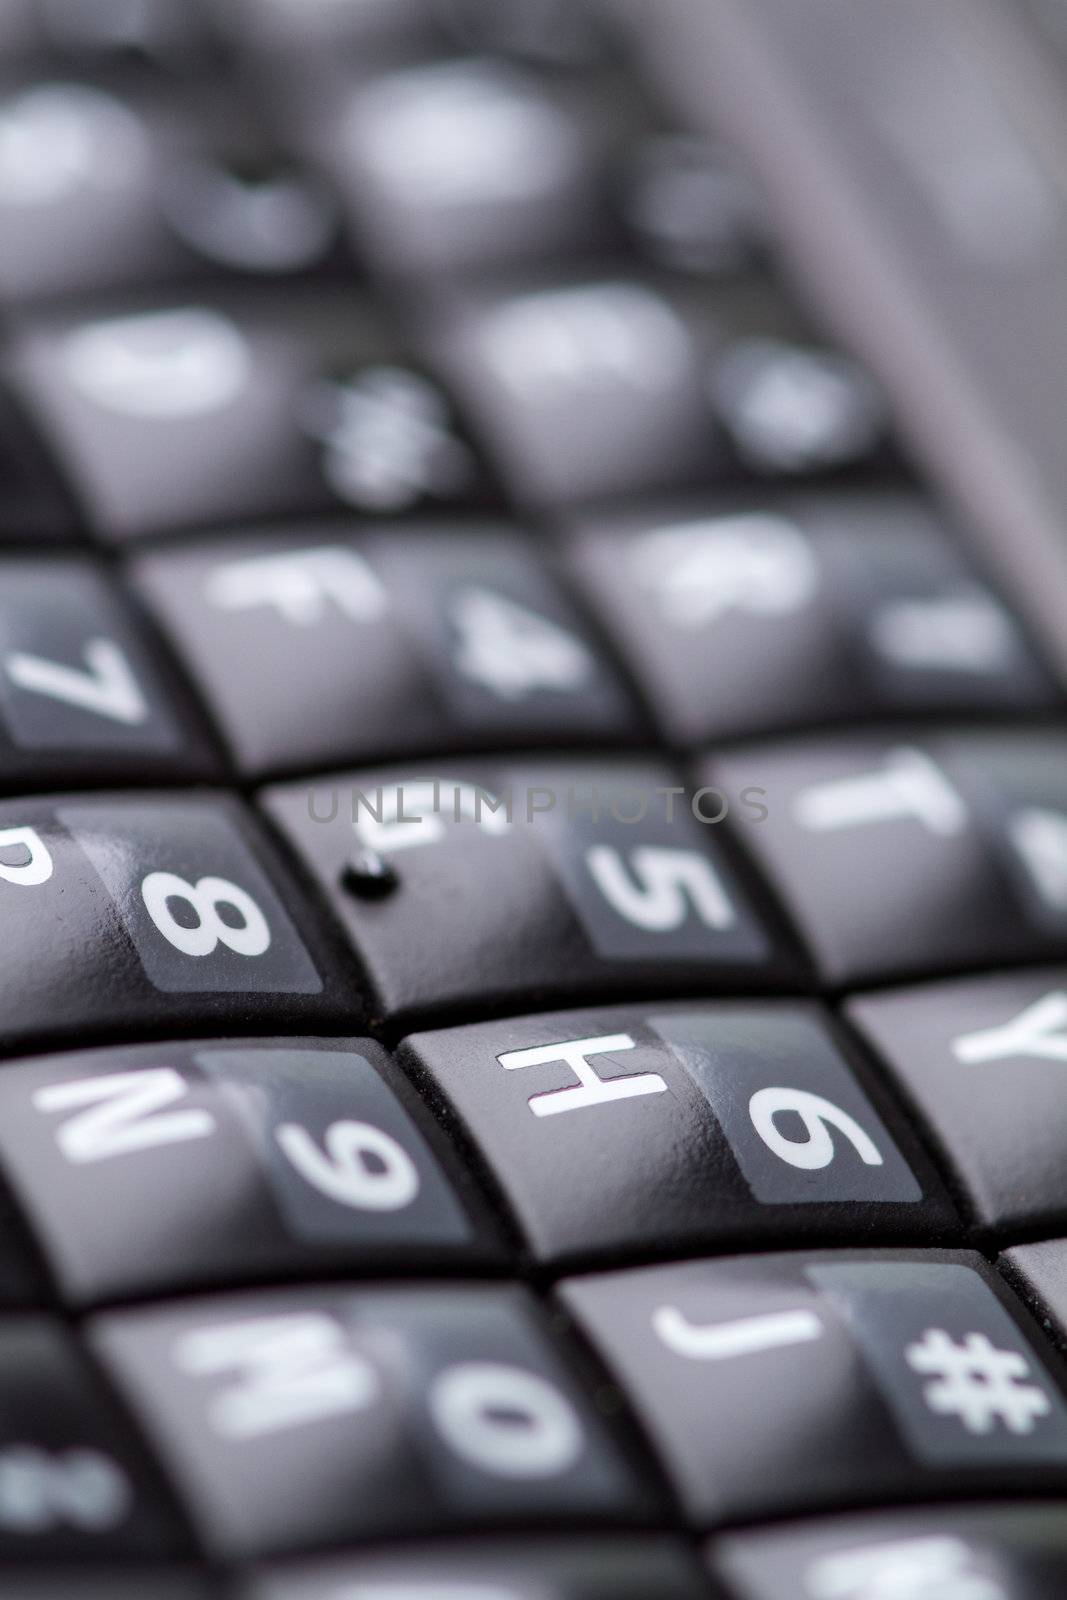 qwerty keypad from a smartphone shot with a narrow depth of field.